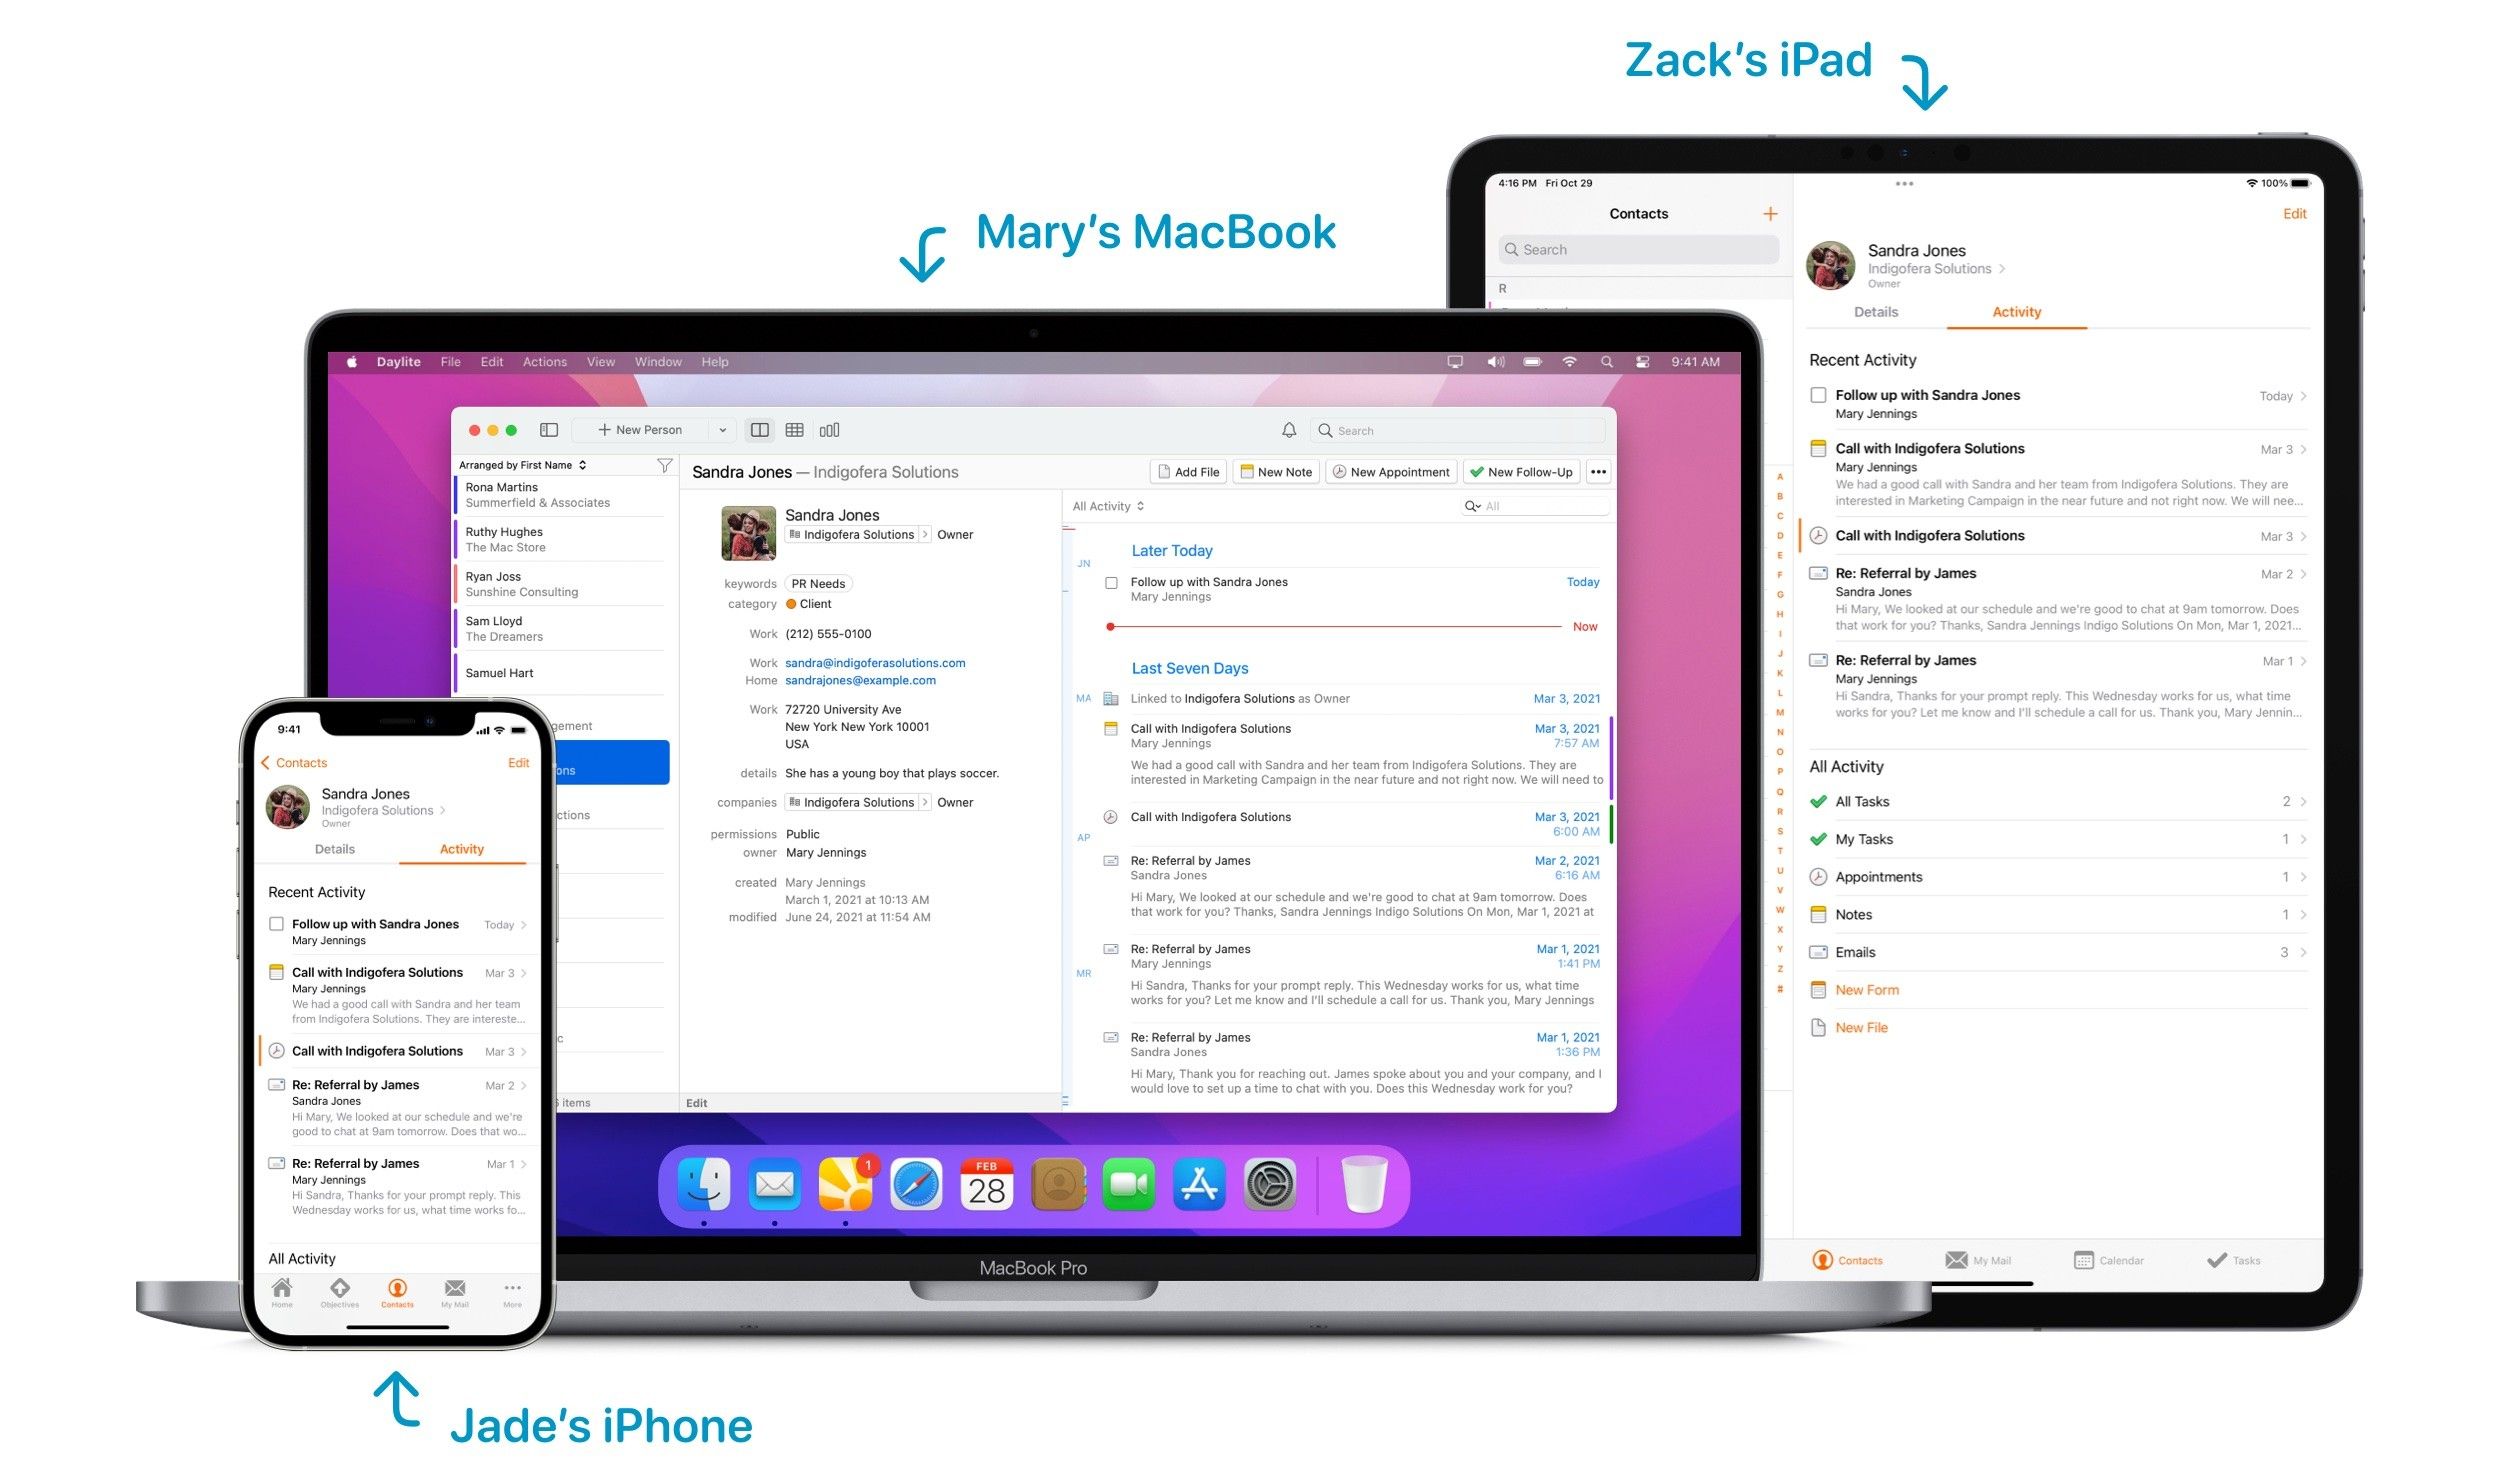 Daylite CRM on different Apple devices: Robin Bailey and his team at Aria Benefits use Daylite to share communications and collaborate efficiently across Apple devices.